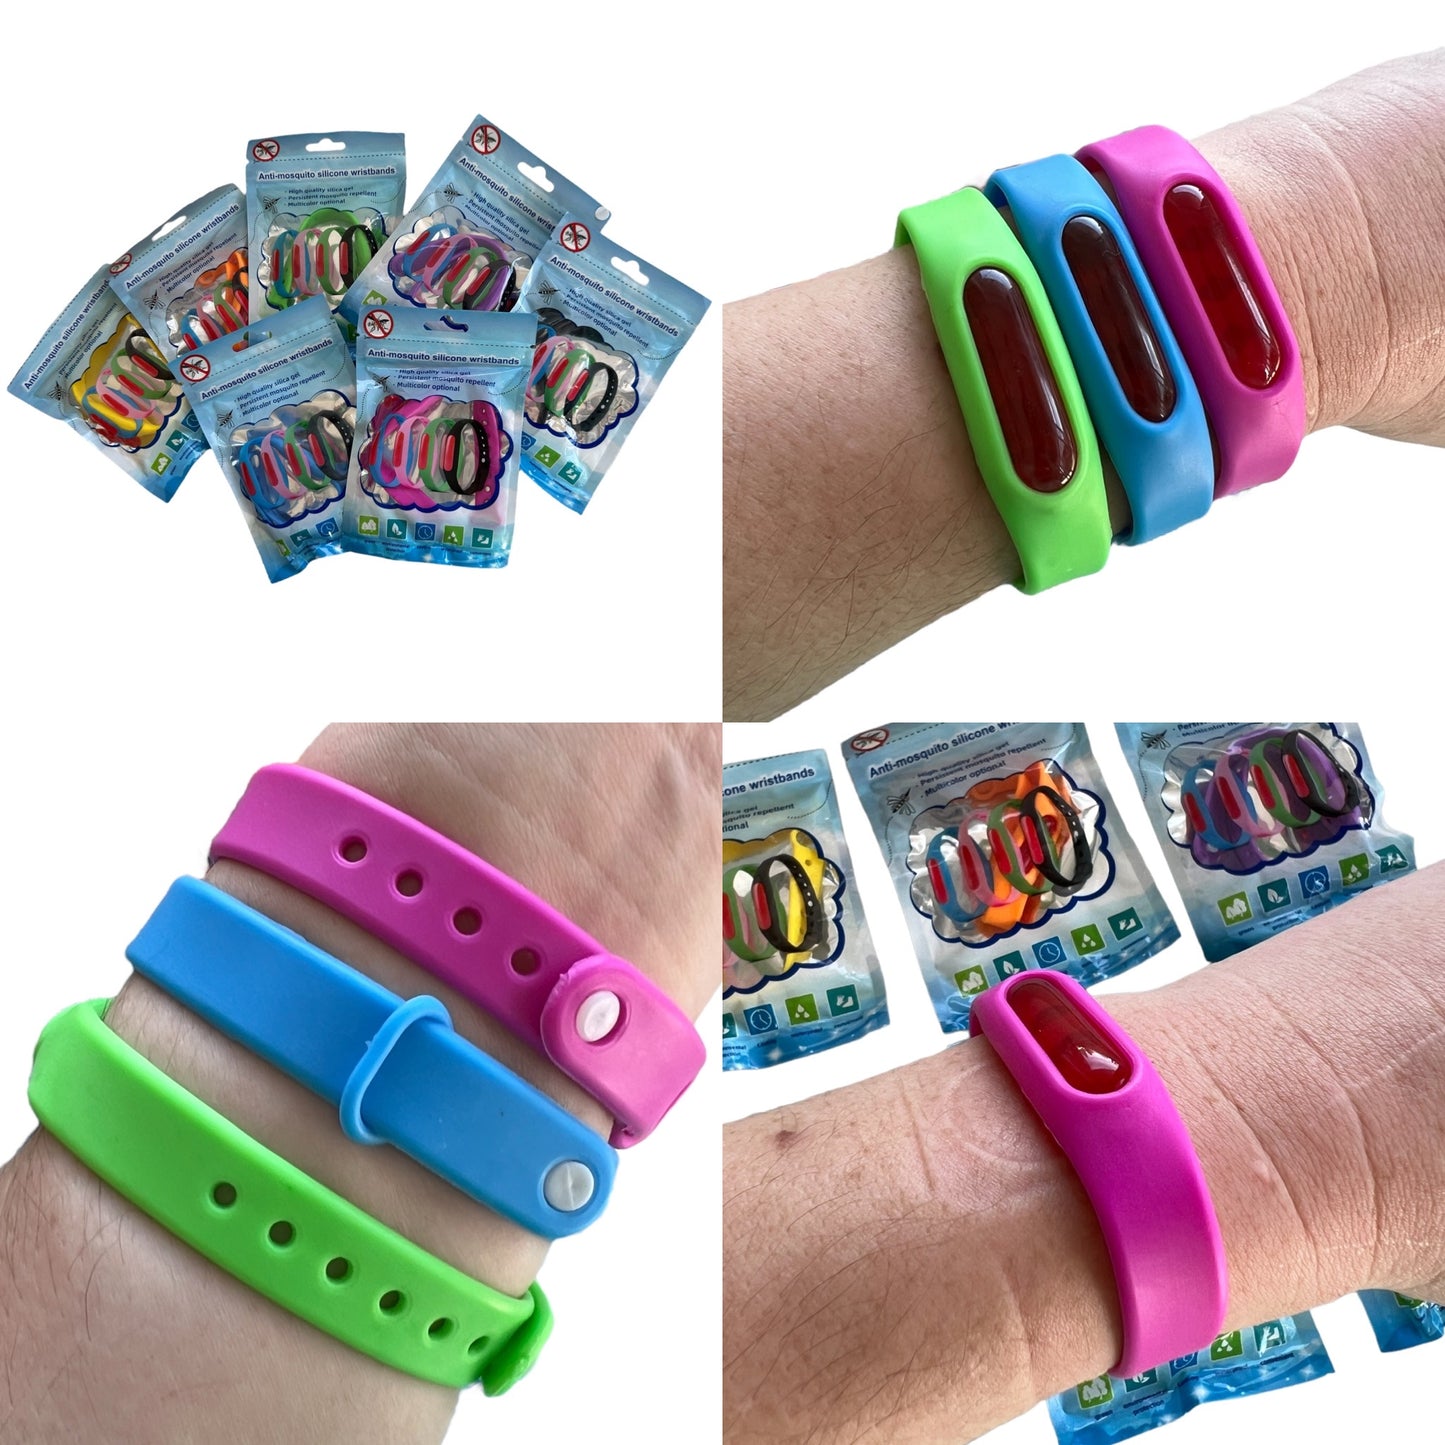 Waterproof Insect Repellant Bracelet Skin Insect Repellent SPIRIT SPARKPLUGS   